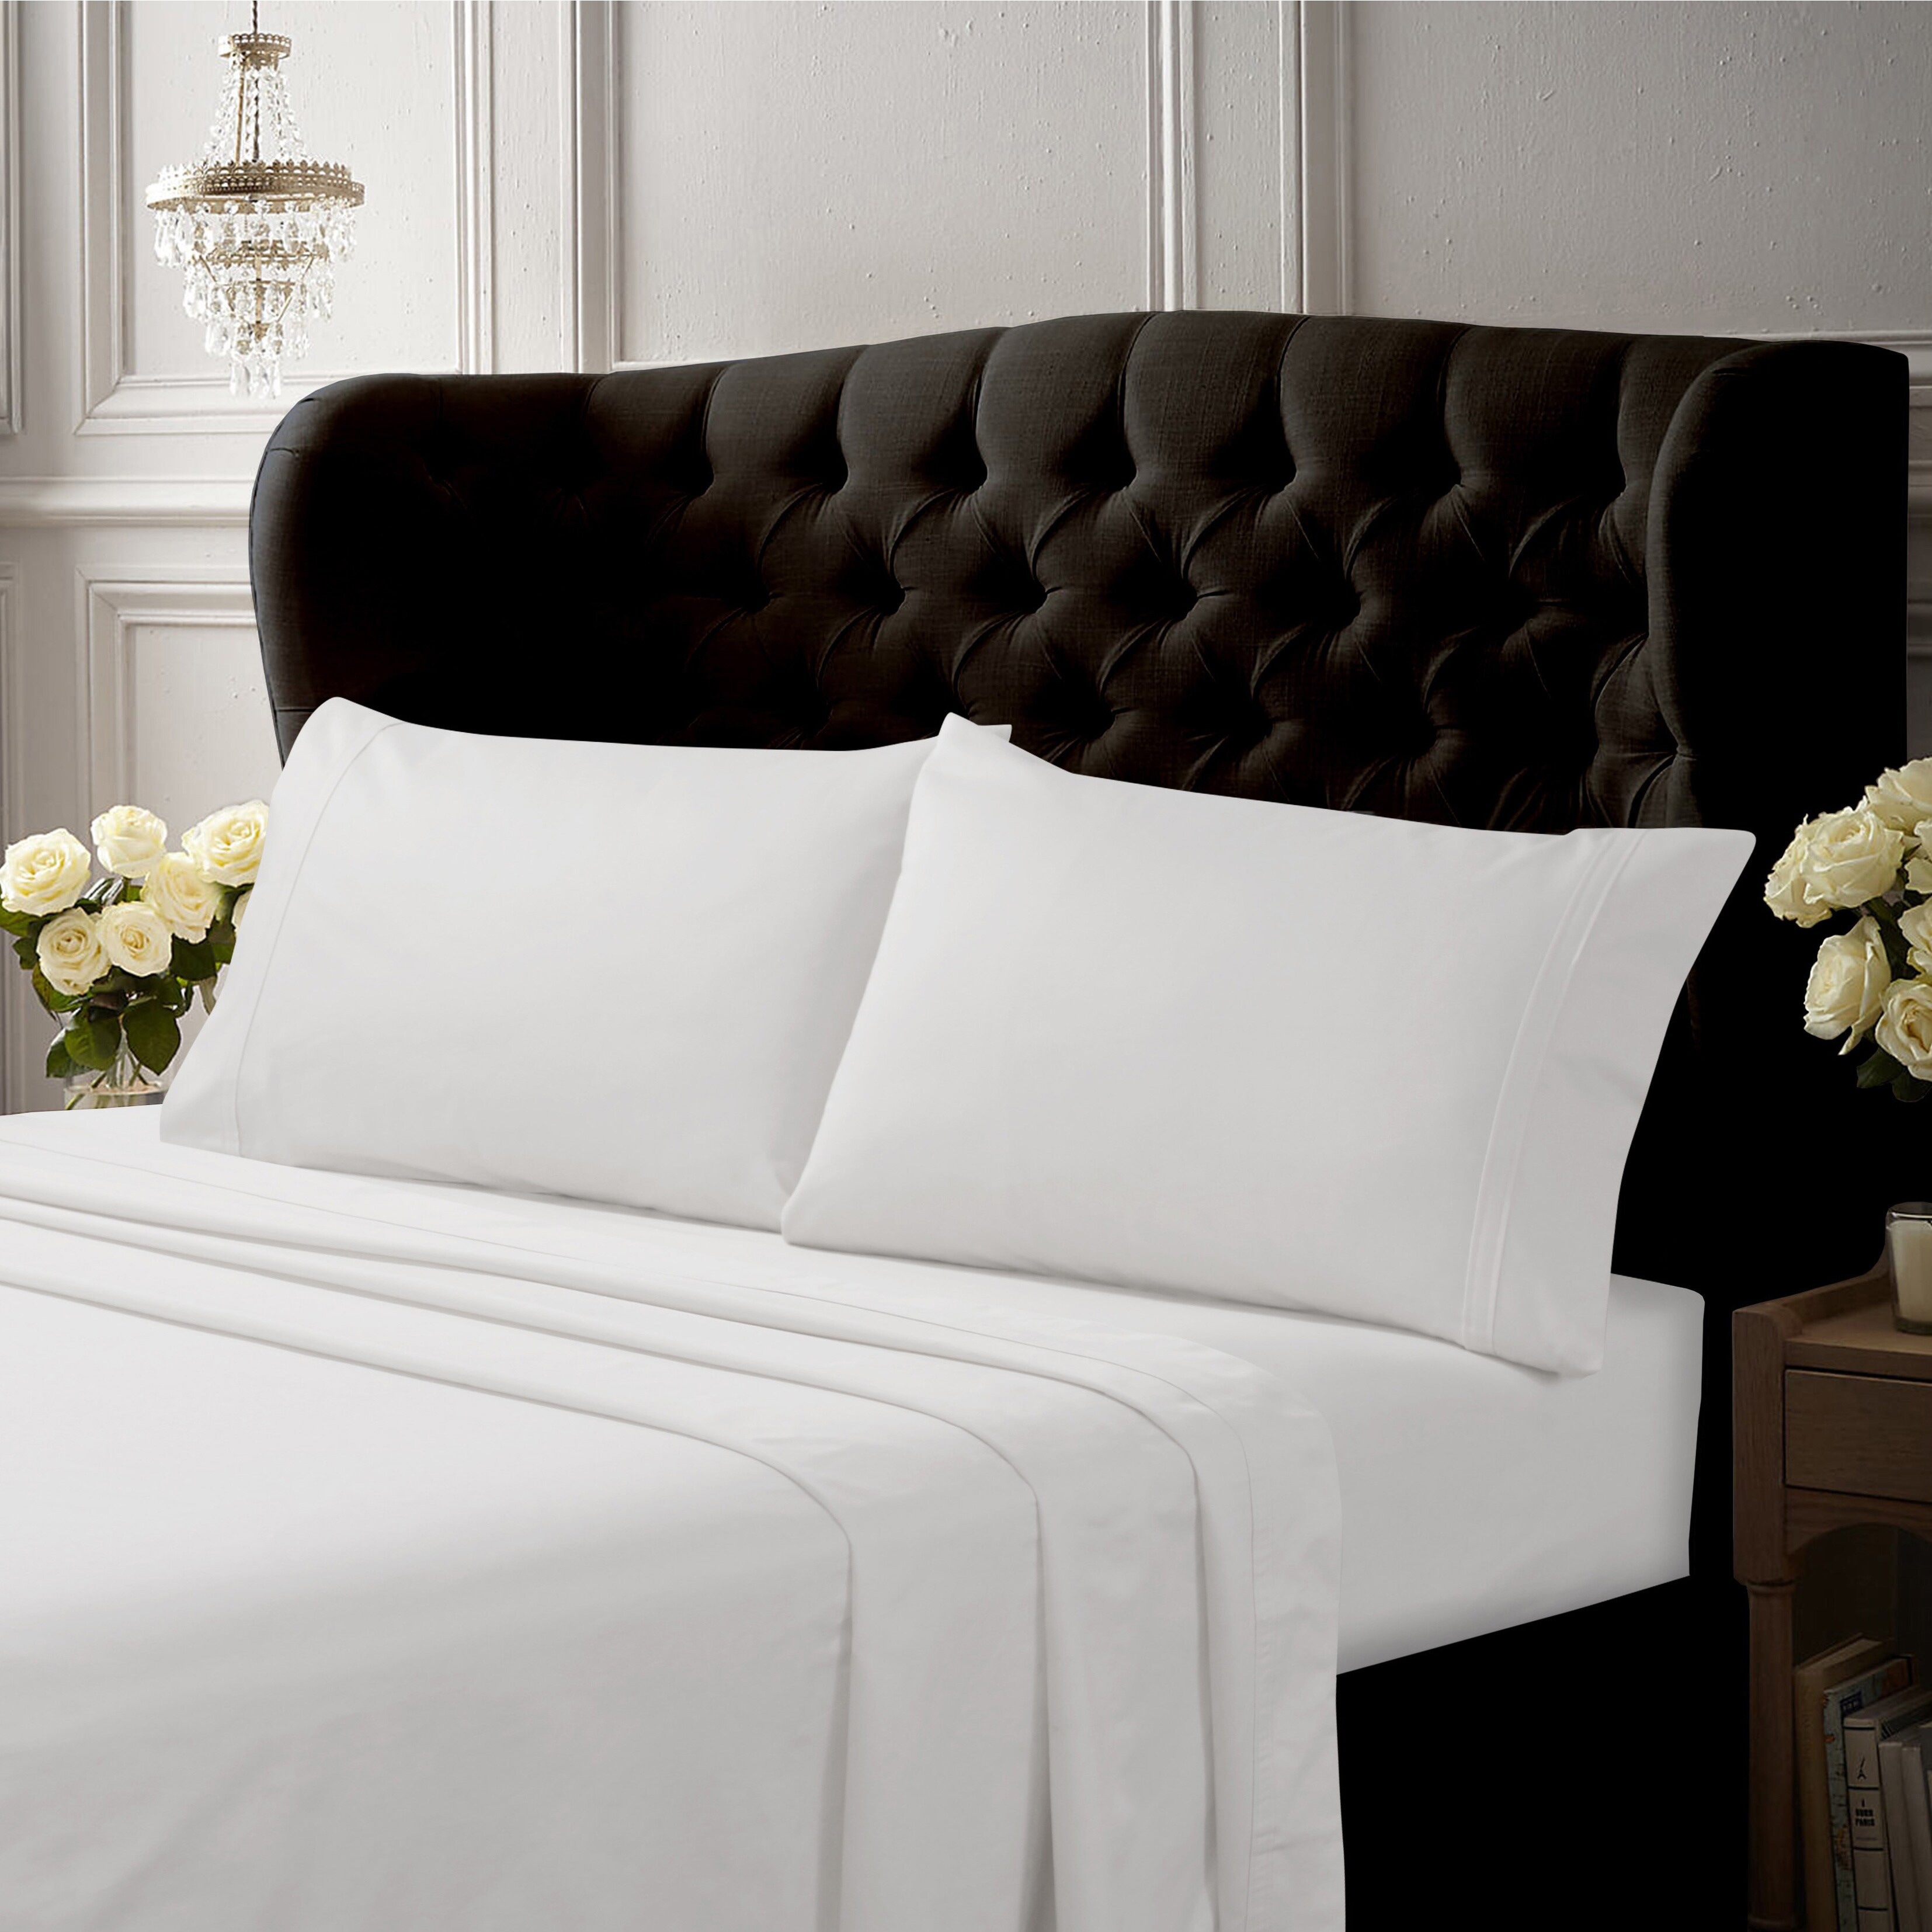 Bedding Items Extra Deep Wall 1000 TC Egyptian Cotton Gold Solid AU Sizes 